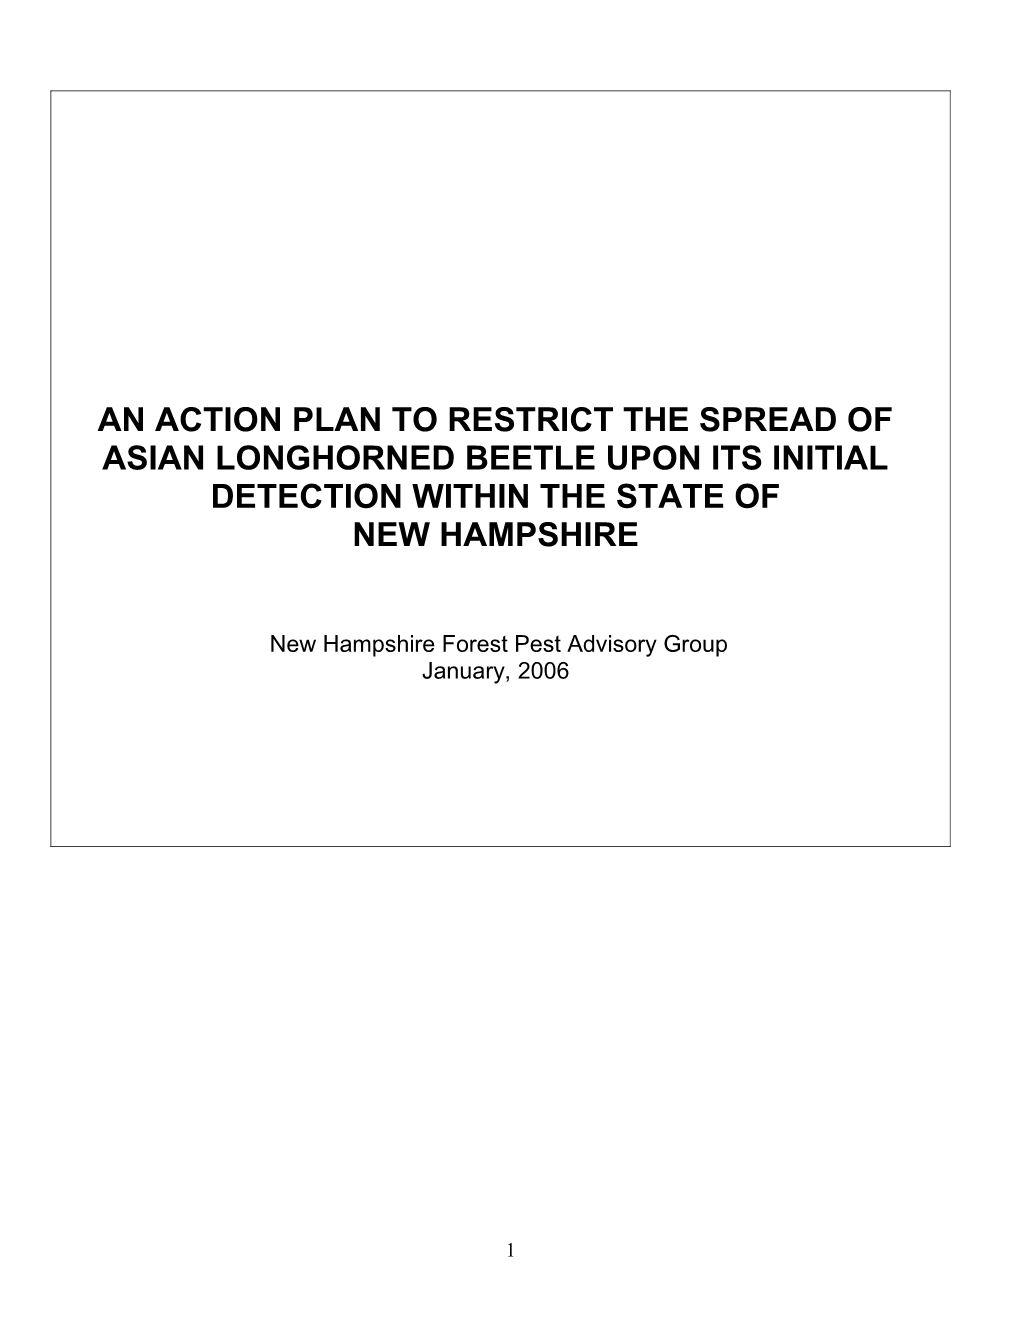 Developed by the New Hampshire Forest Pest Advisory Group